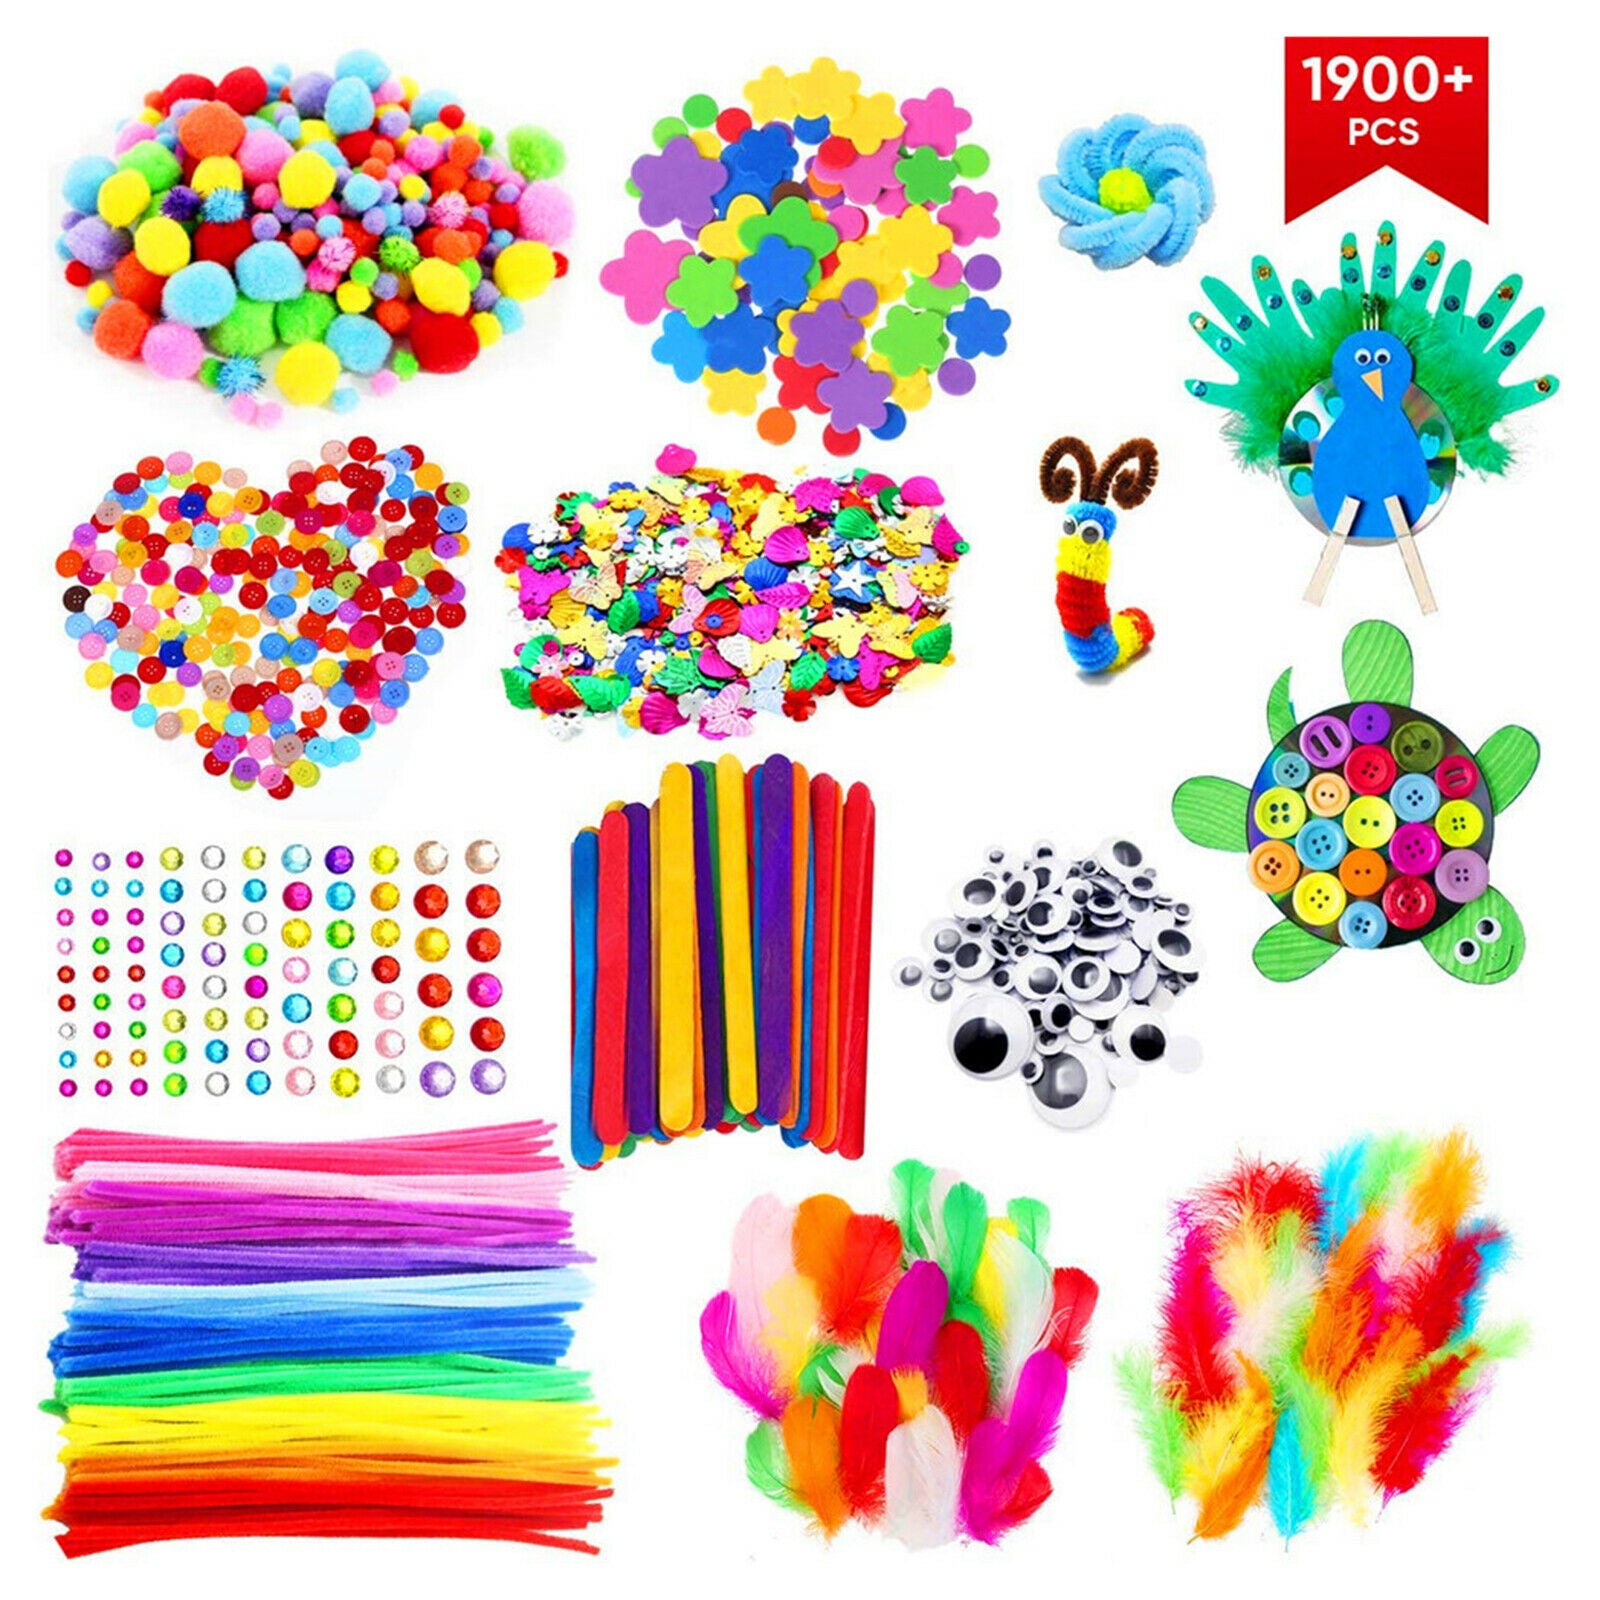 All in One Kids Arts & Crafts Supplies Kit DIY Crafting Collage Material Set